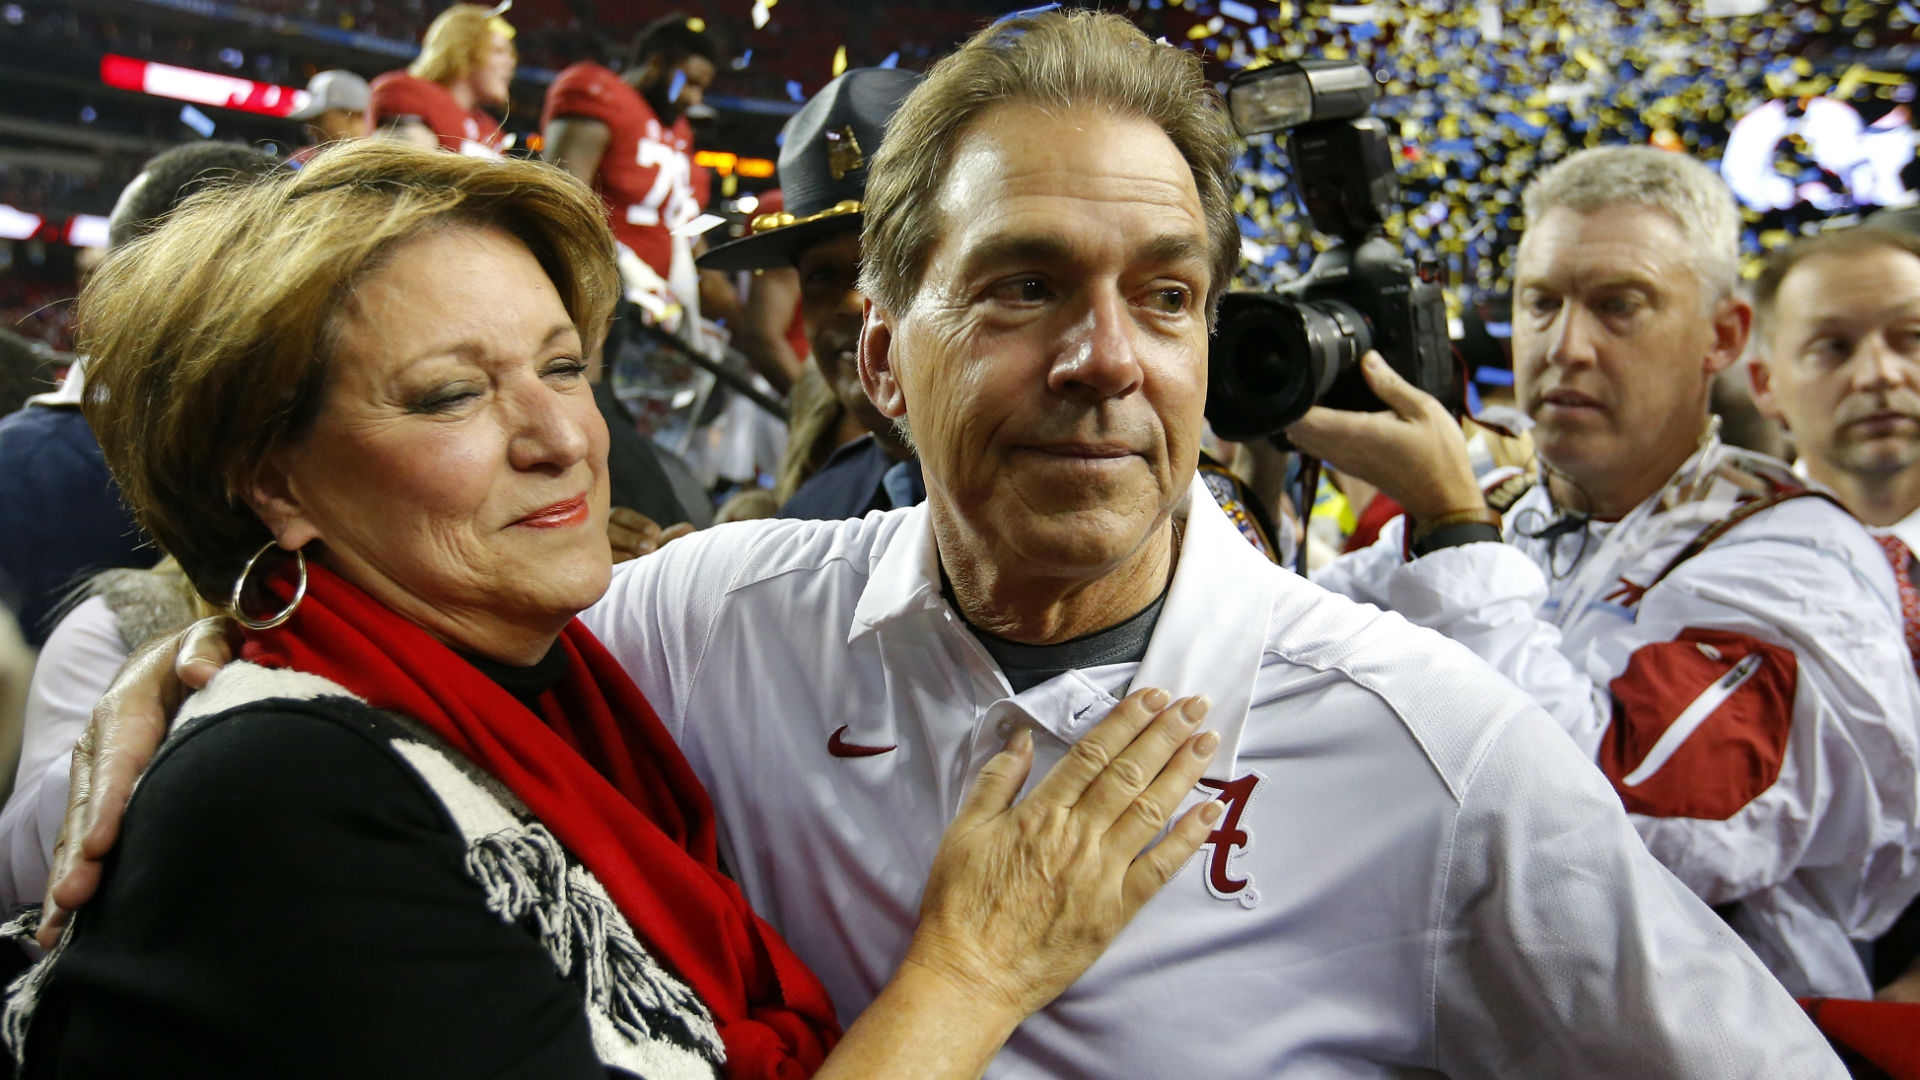 Remember when everyone buried Bama, Nick Saban after Ole Miss loss?